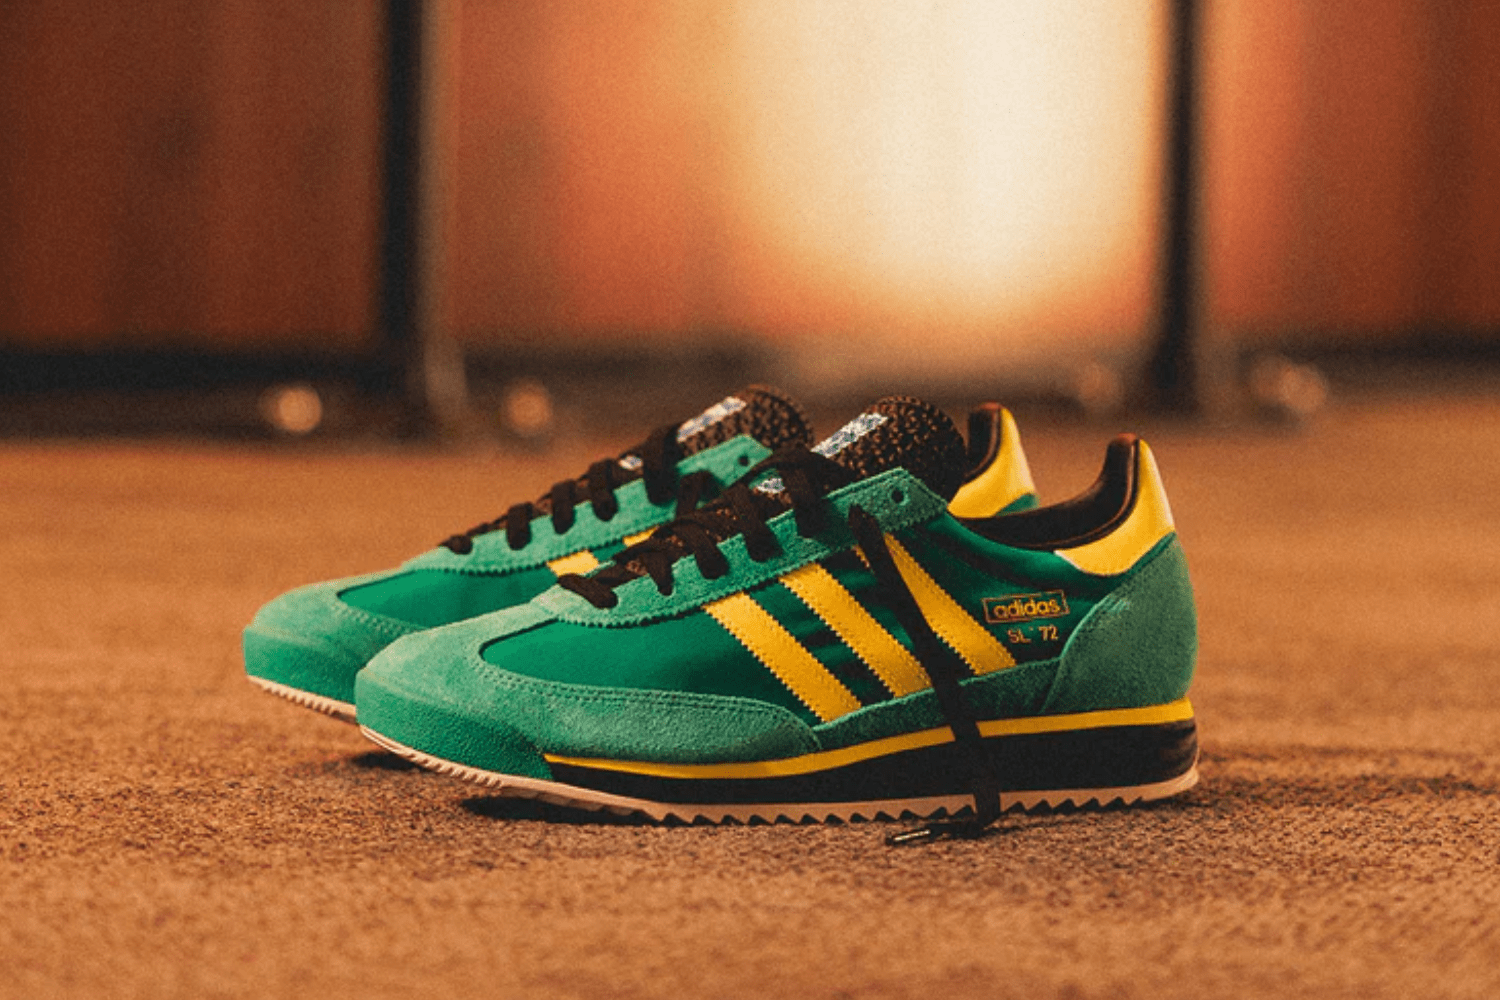 The comeback of the iconic adidas SL 72